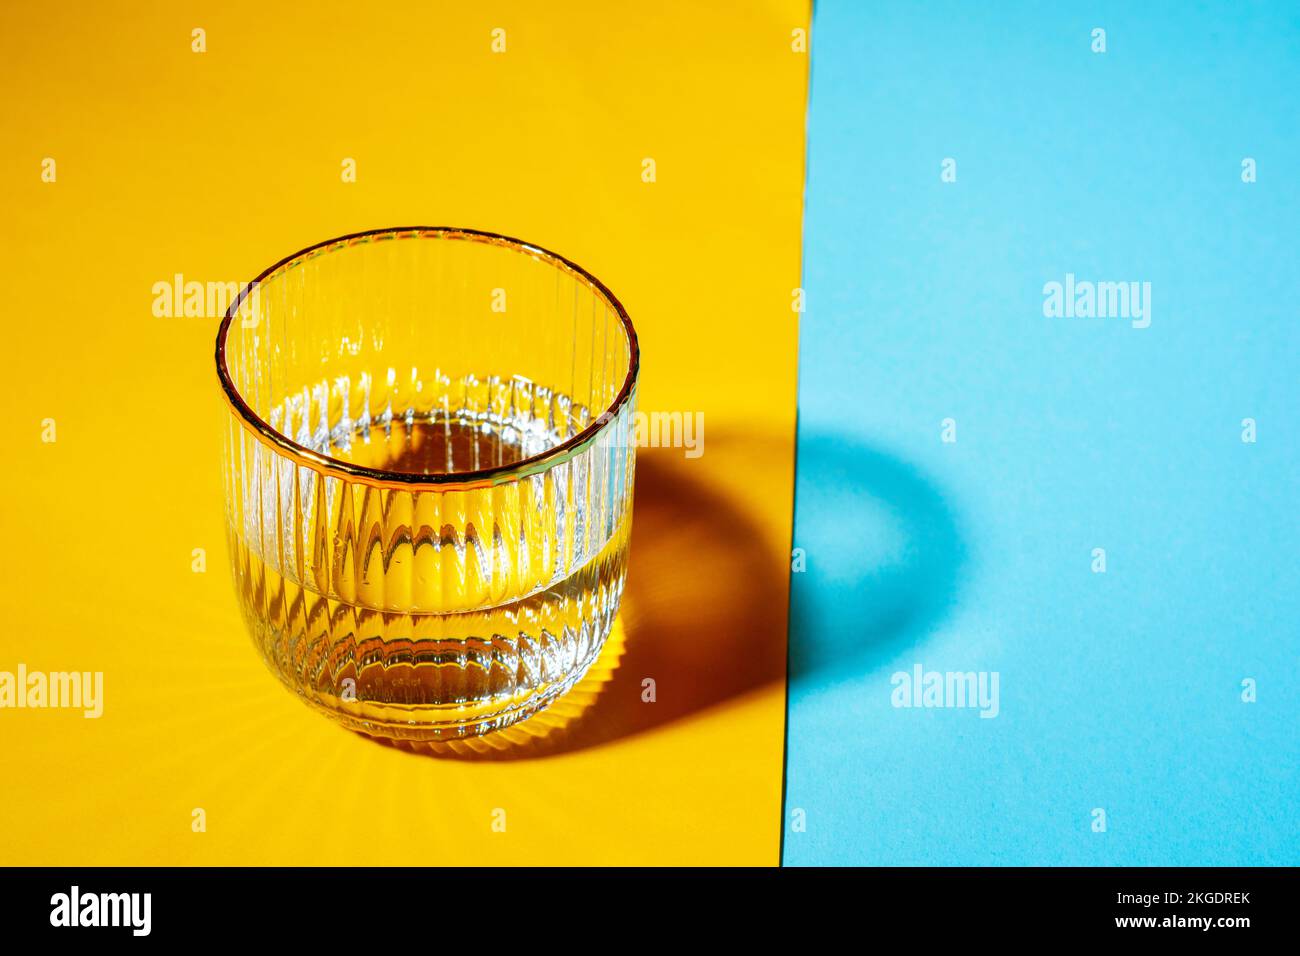 Glasses with water on two tone background with copy space. Stock Photo